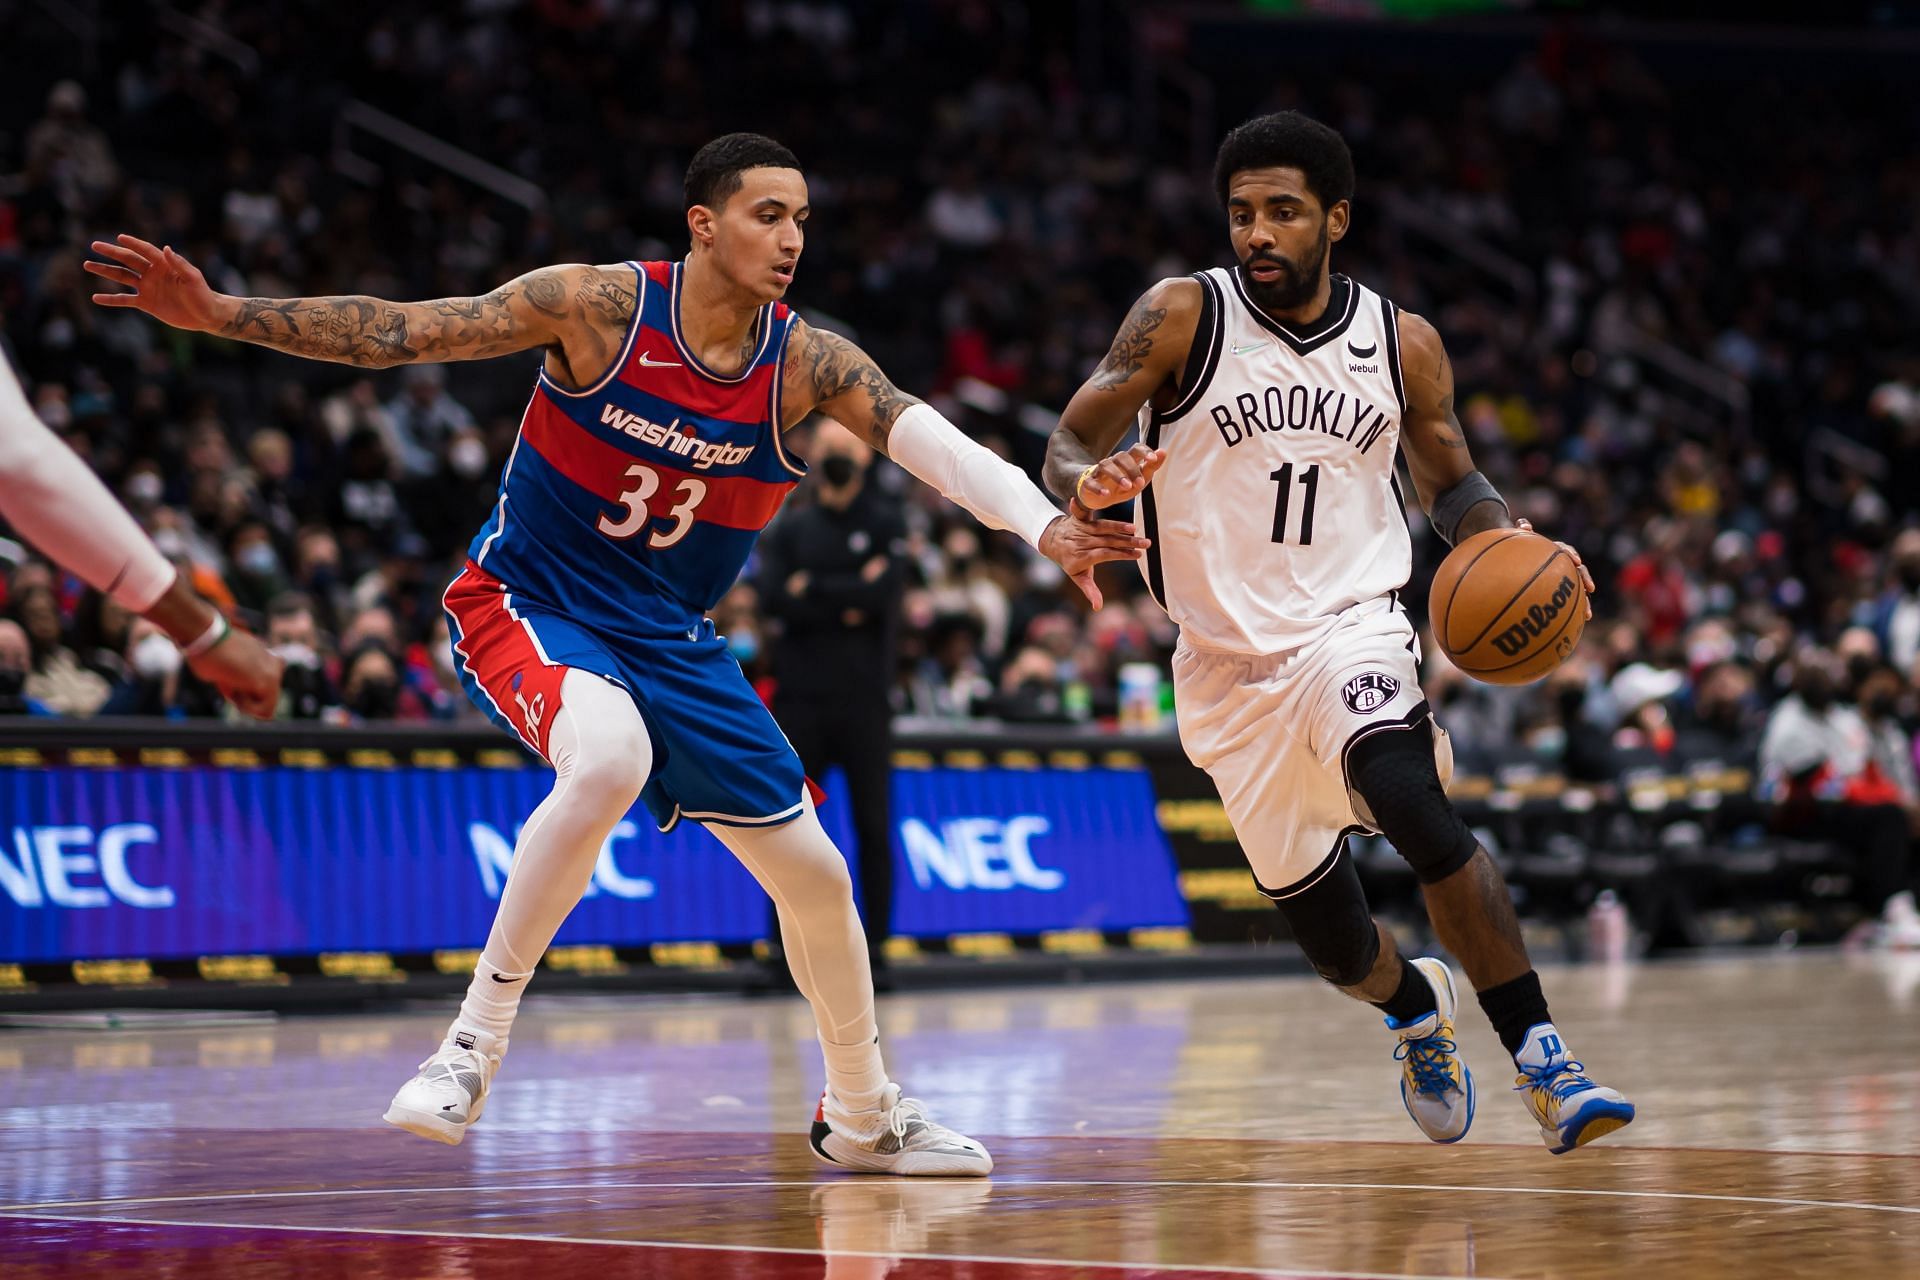 Kyle Kuzma guarding Kyrie Irving in a game between the Washington Wizards and the Brooklyn Nets